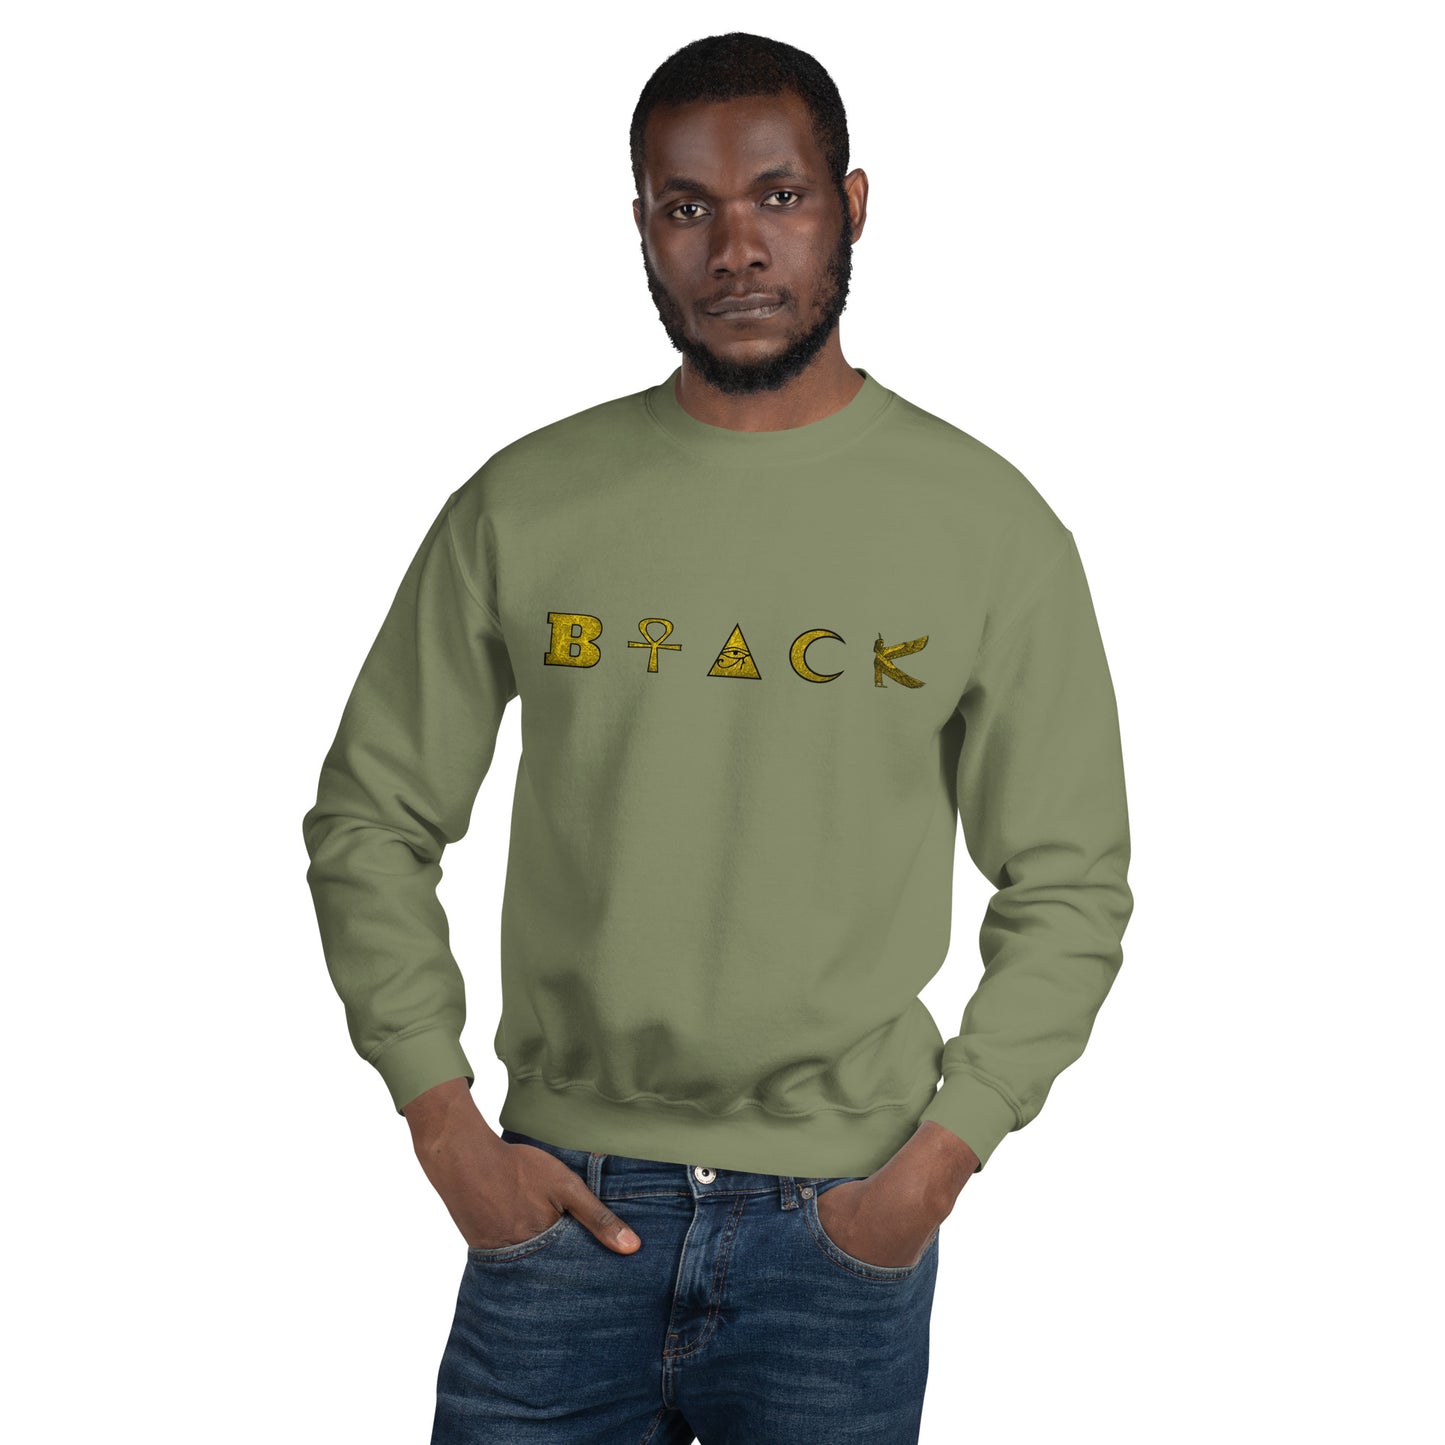 Fall Kemetic Clothing for Black Culture